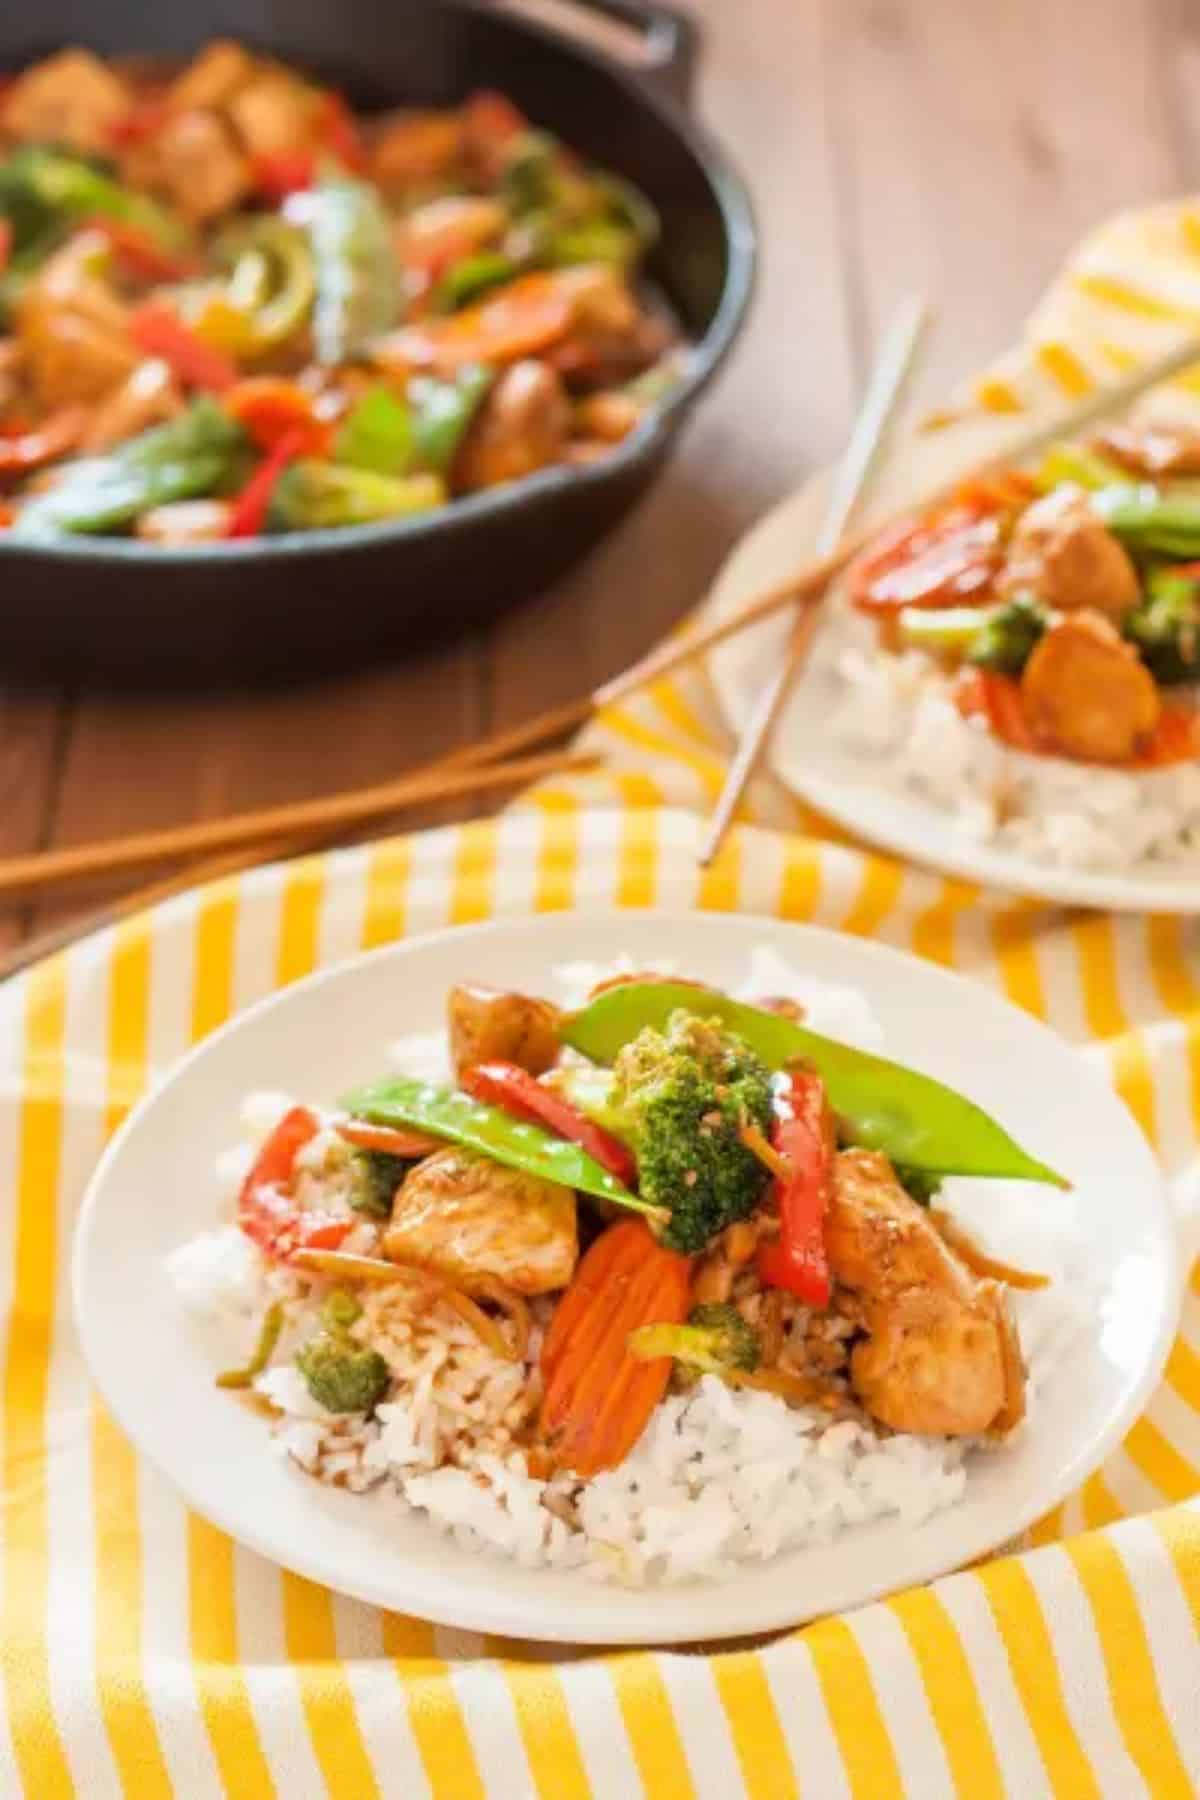 Delicious Gluten-Free Stir Fry on a white plate.